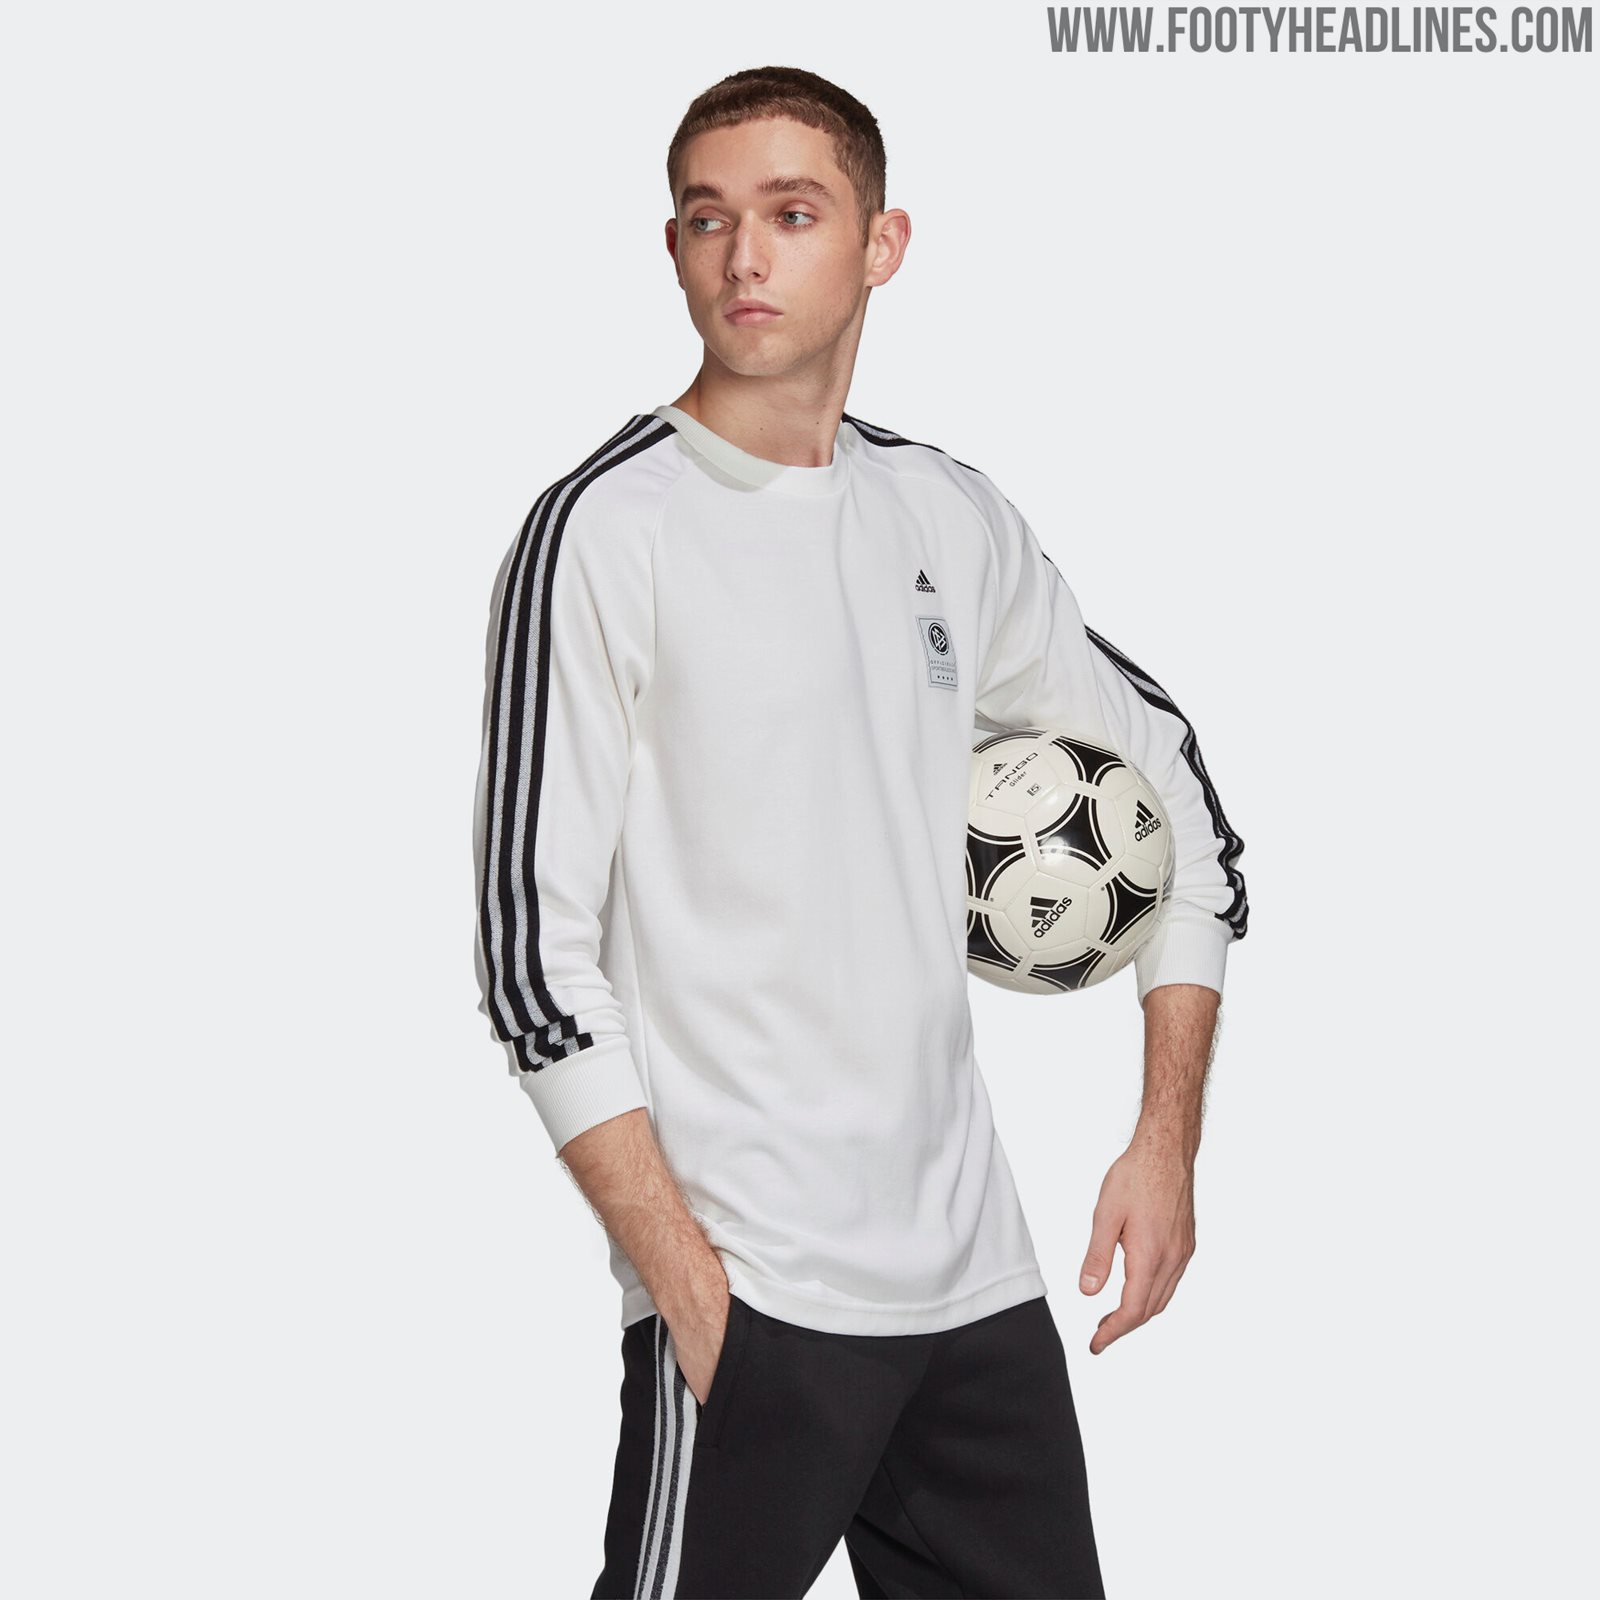 Adidas Germany EURO 2020 Off-Pitch Collection Released | Early 2000s ...